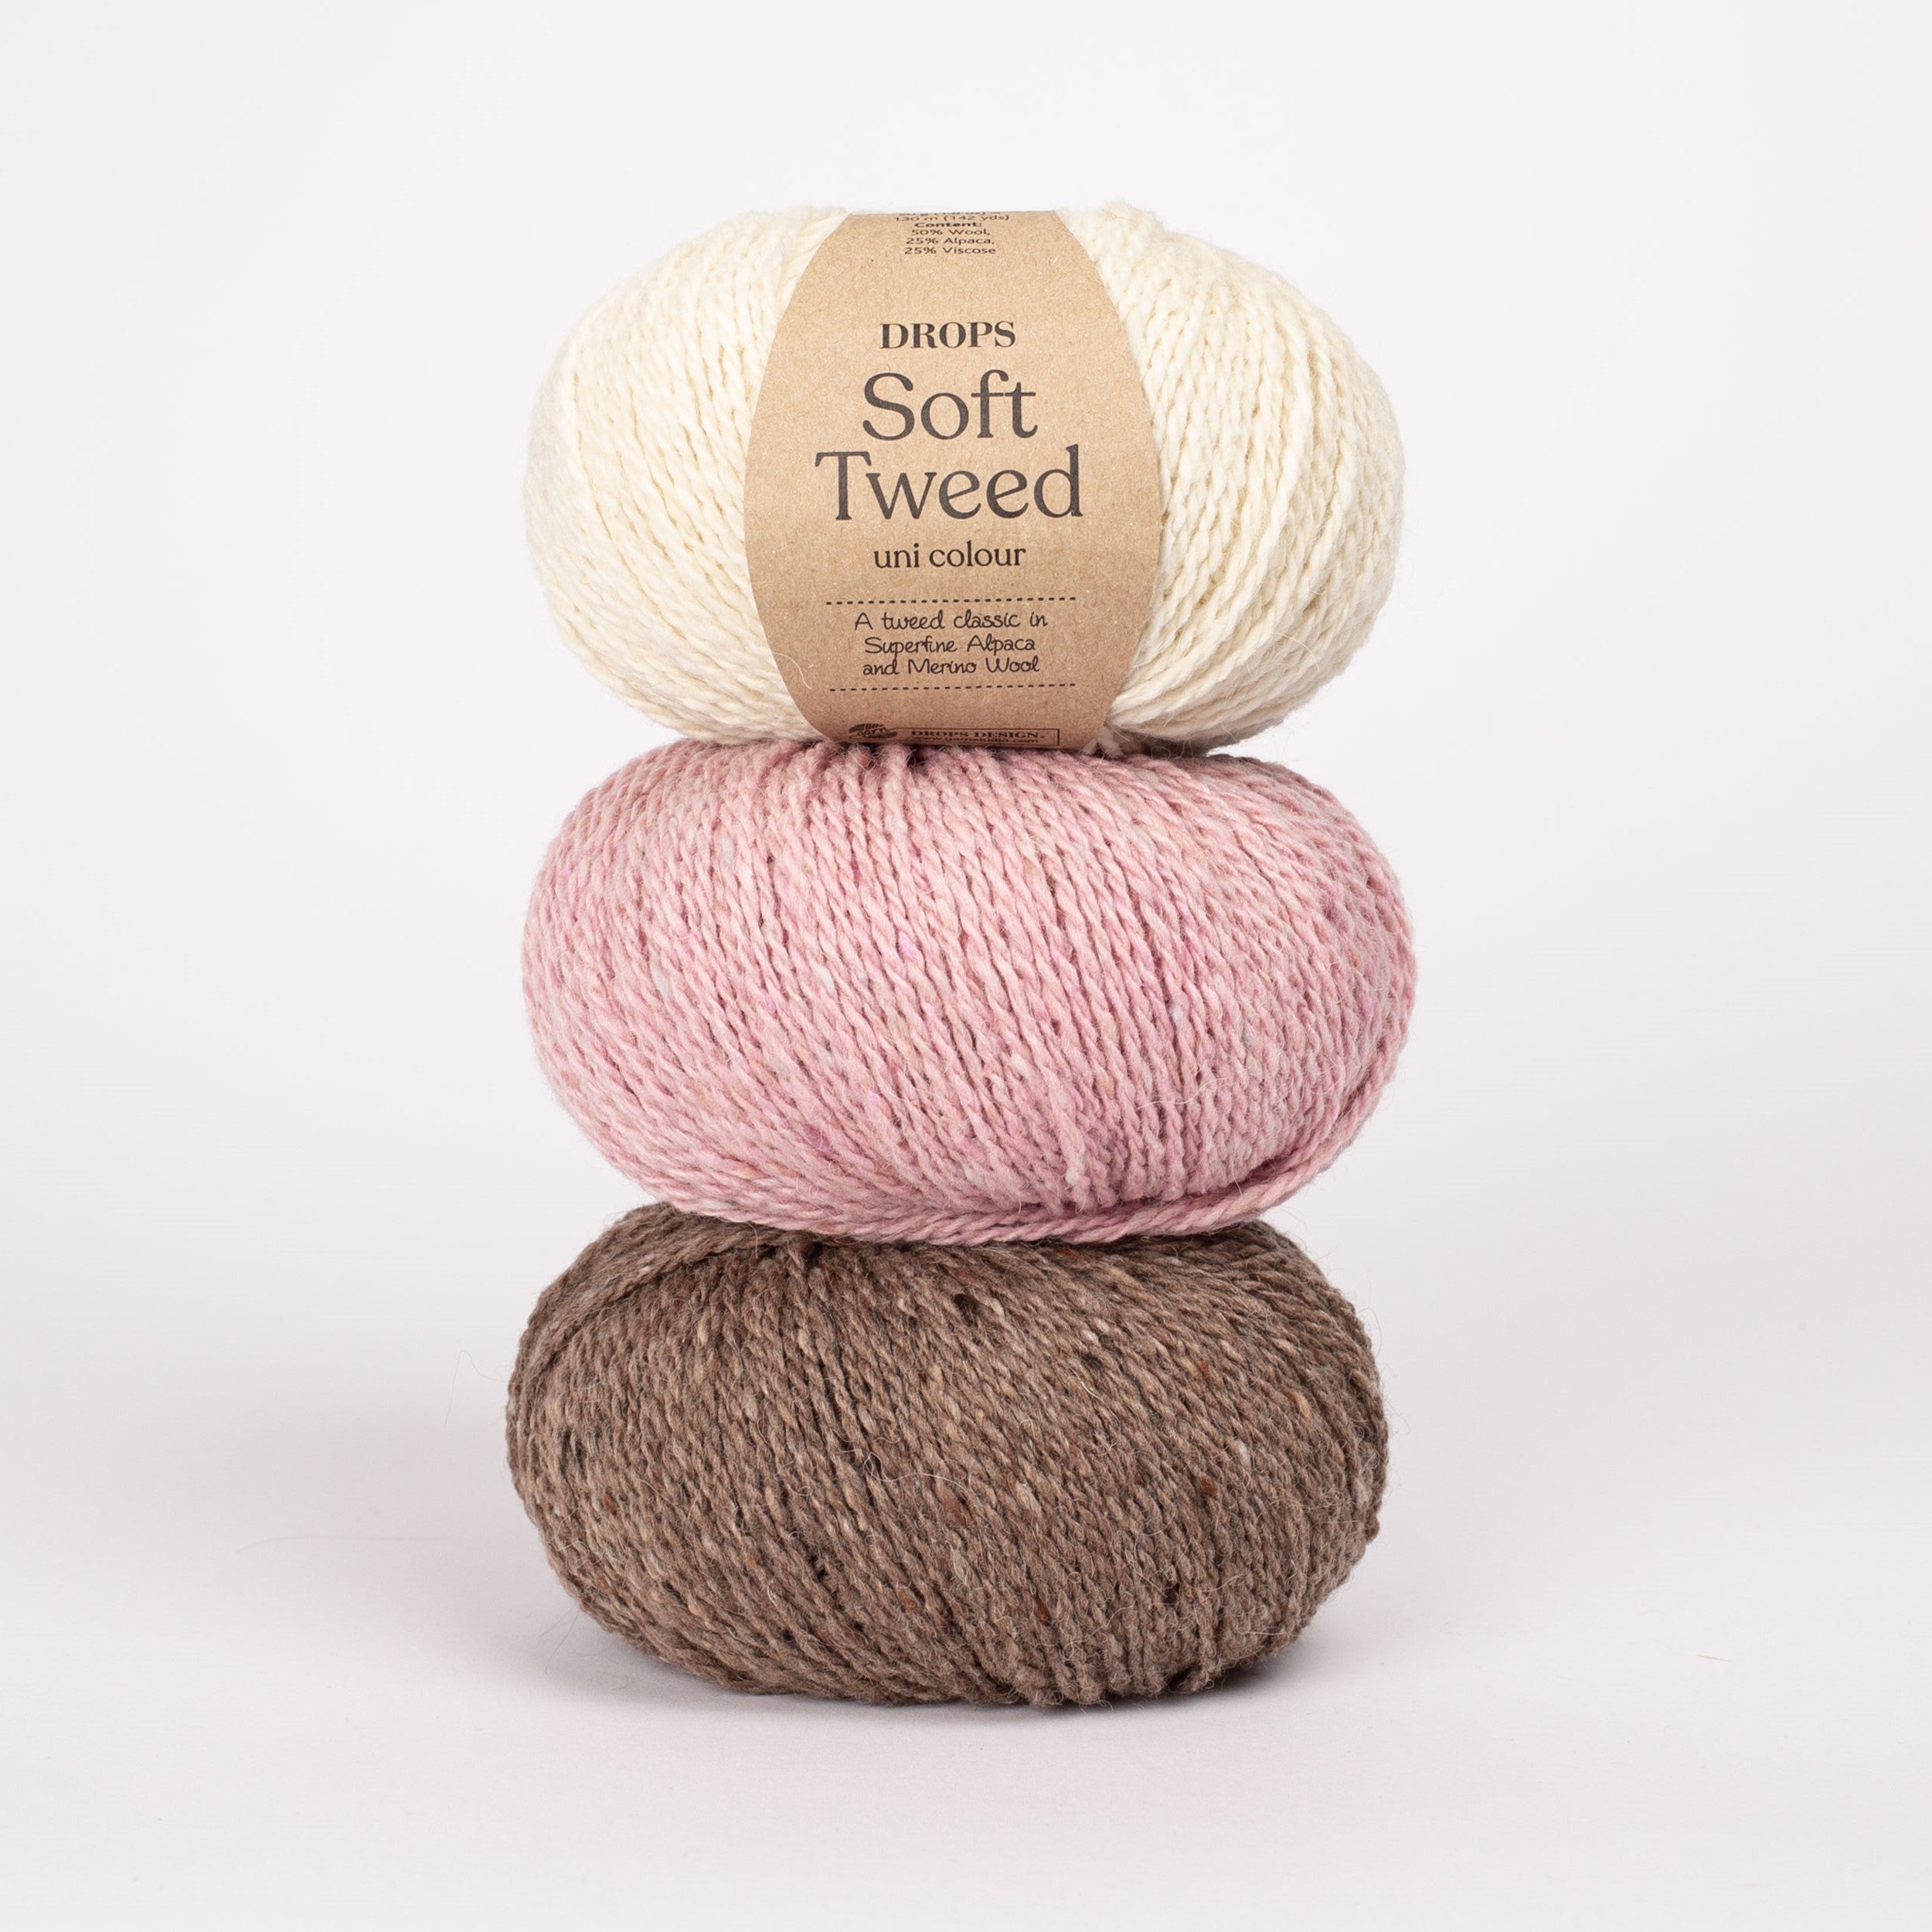 Drops Air - Shop exclusive yarn from Drops Design 